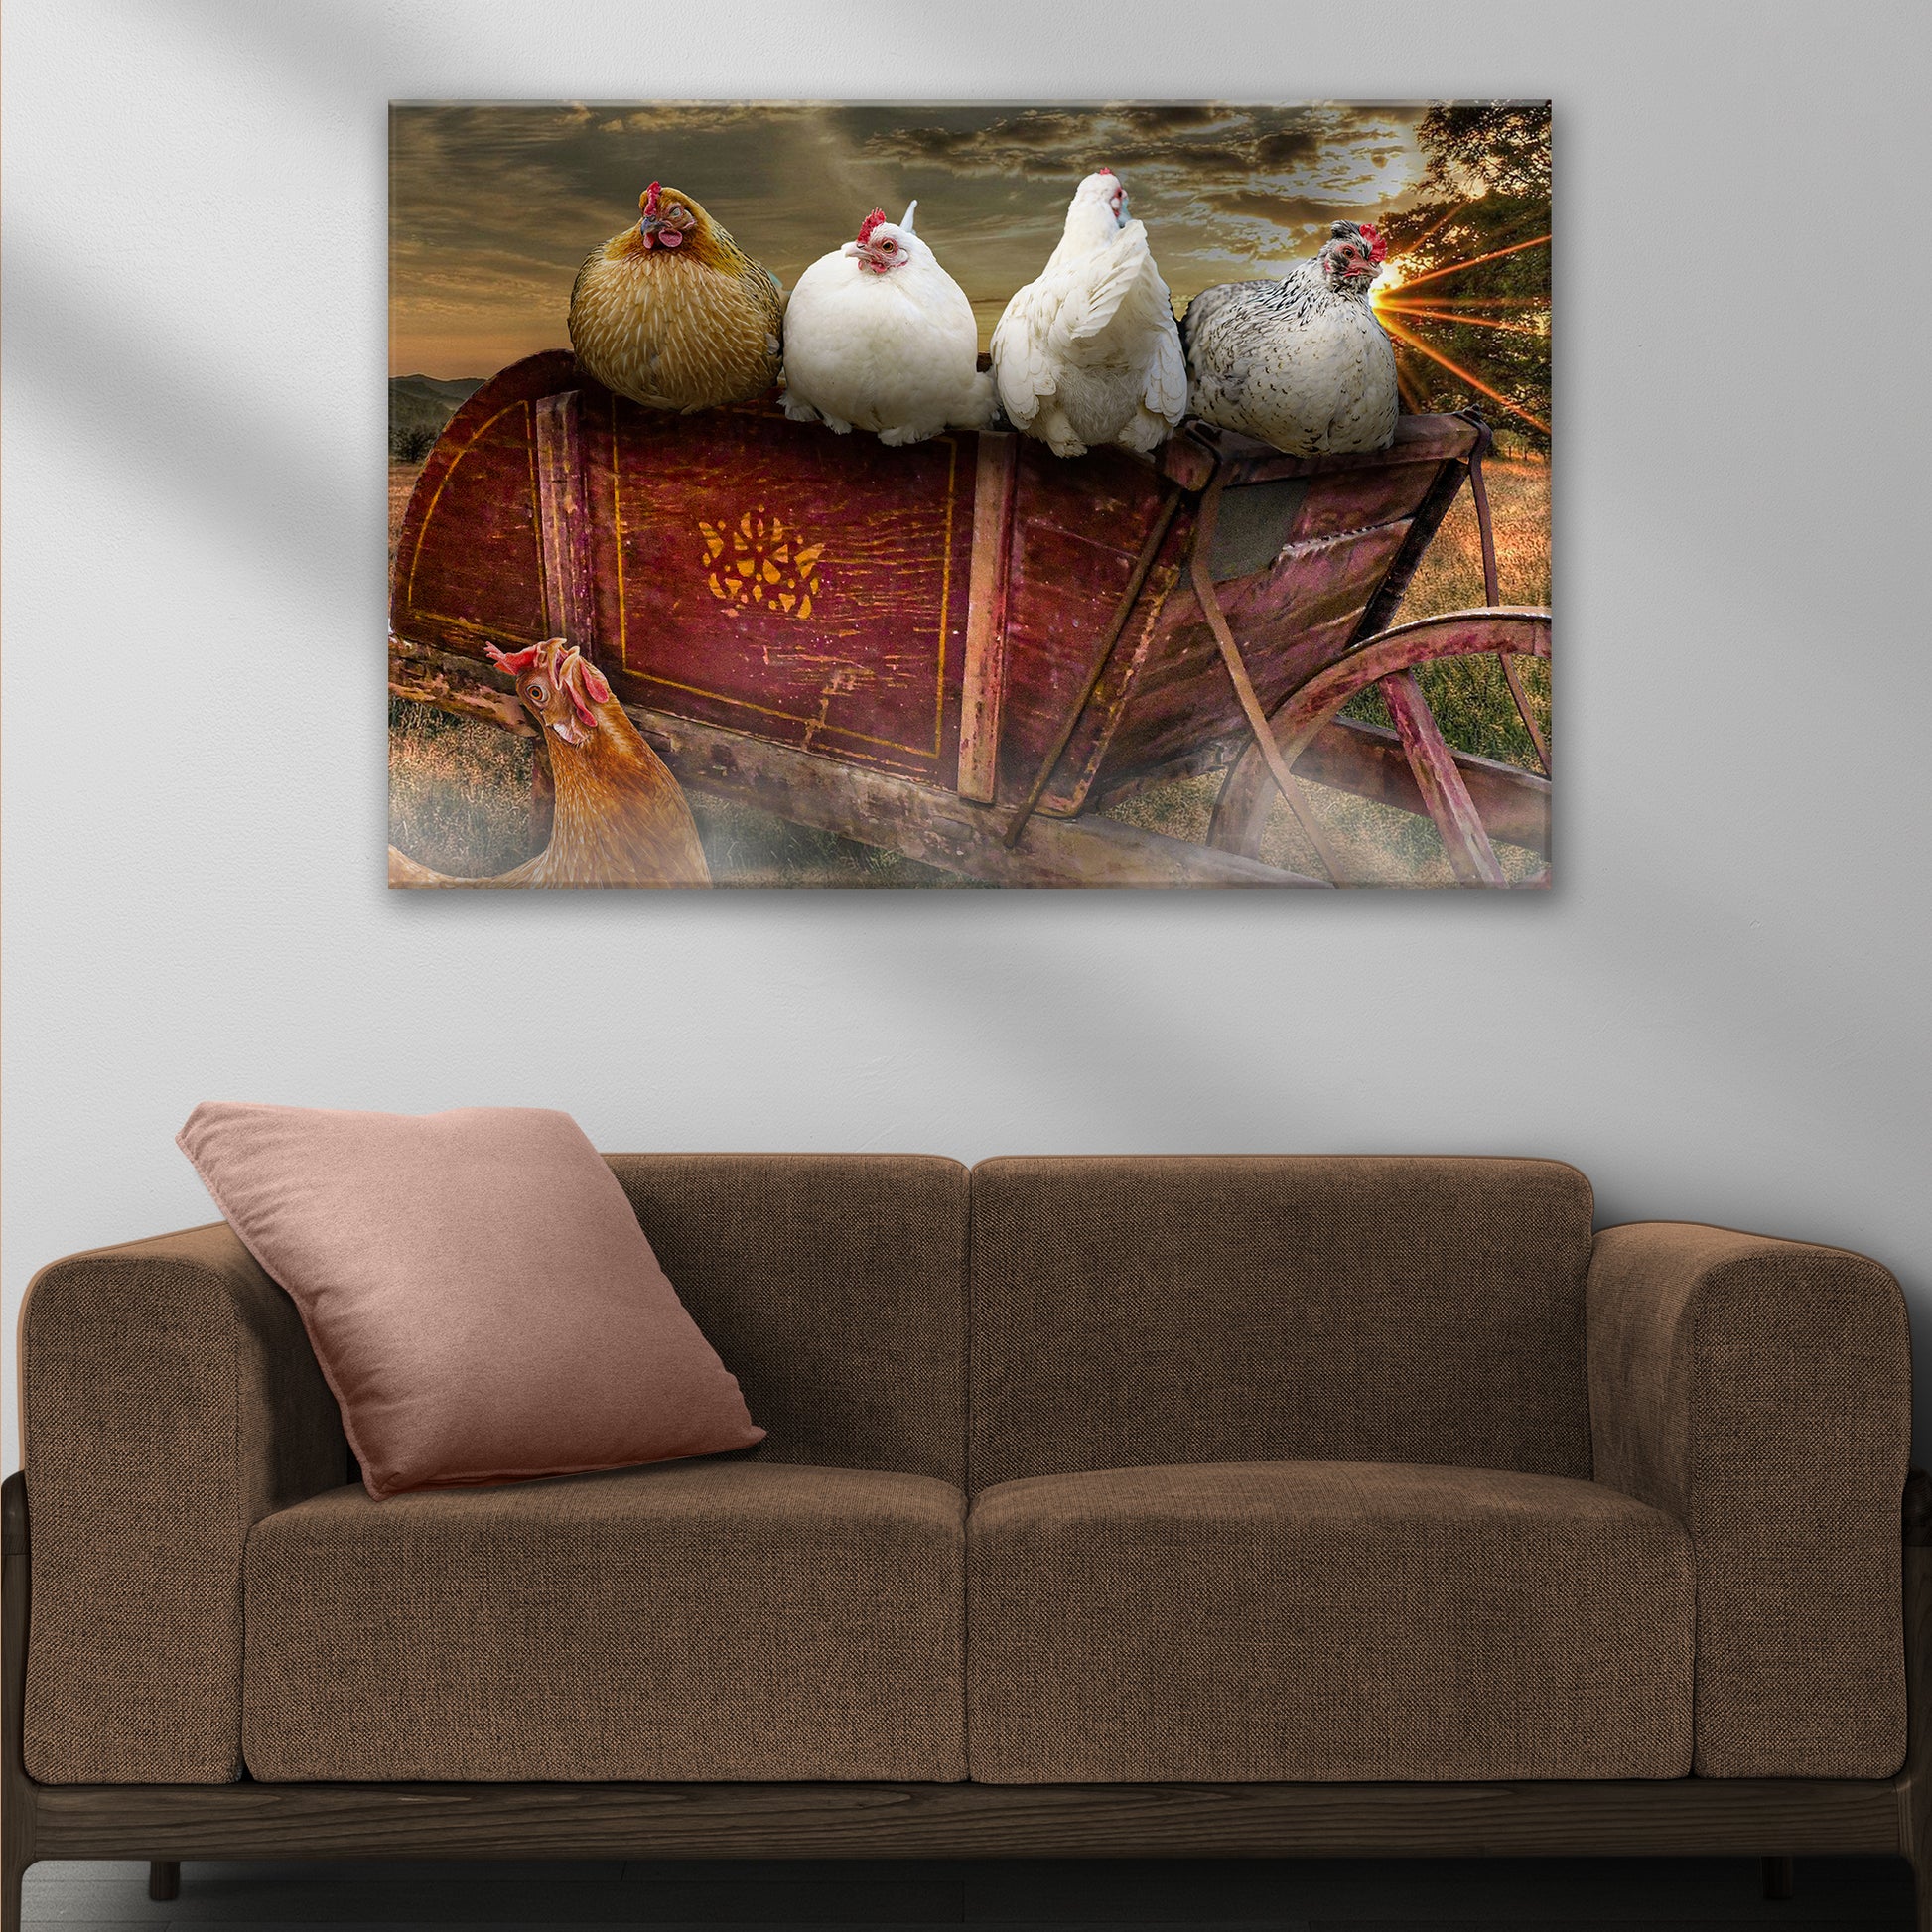 Modern Chickens On Wheelbarrow Canvas Wall Art Style 2 - Image by Tailored Canvases